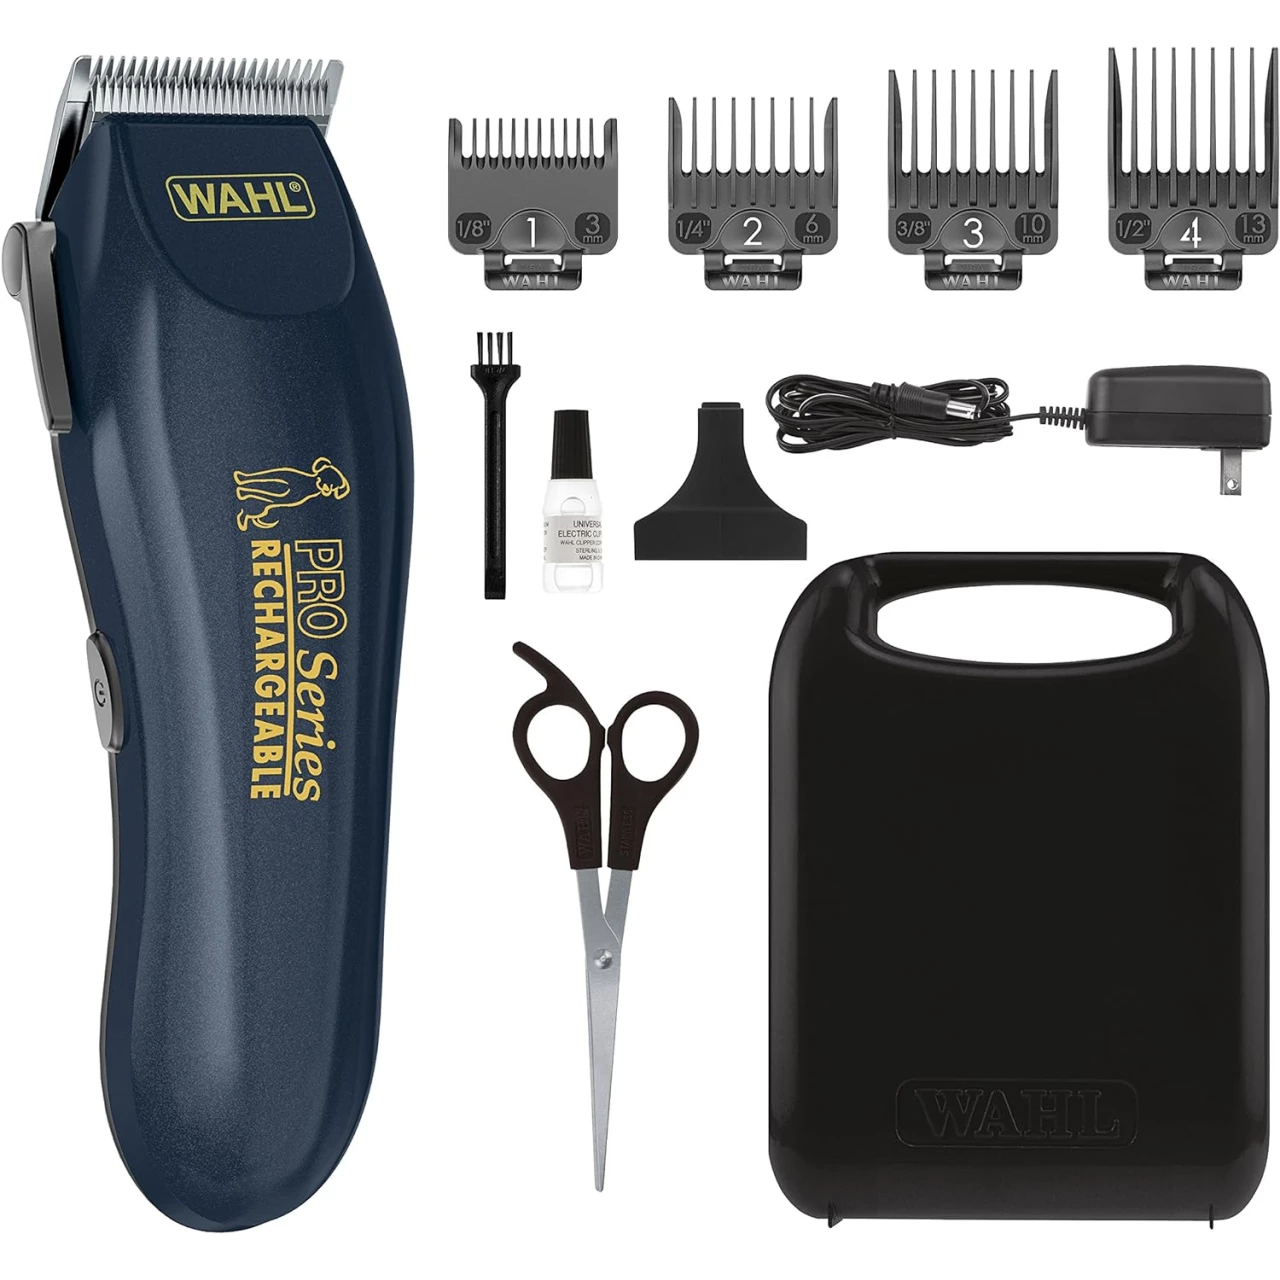 WAHL Deluxe Pro Series Cordless Lithium Ion Clipper Kit for Dog Grooming at Home